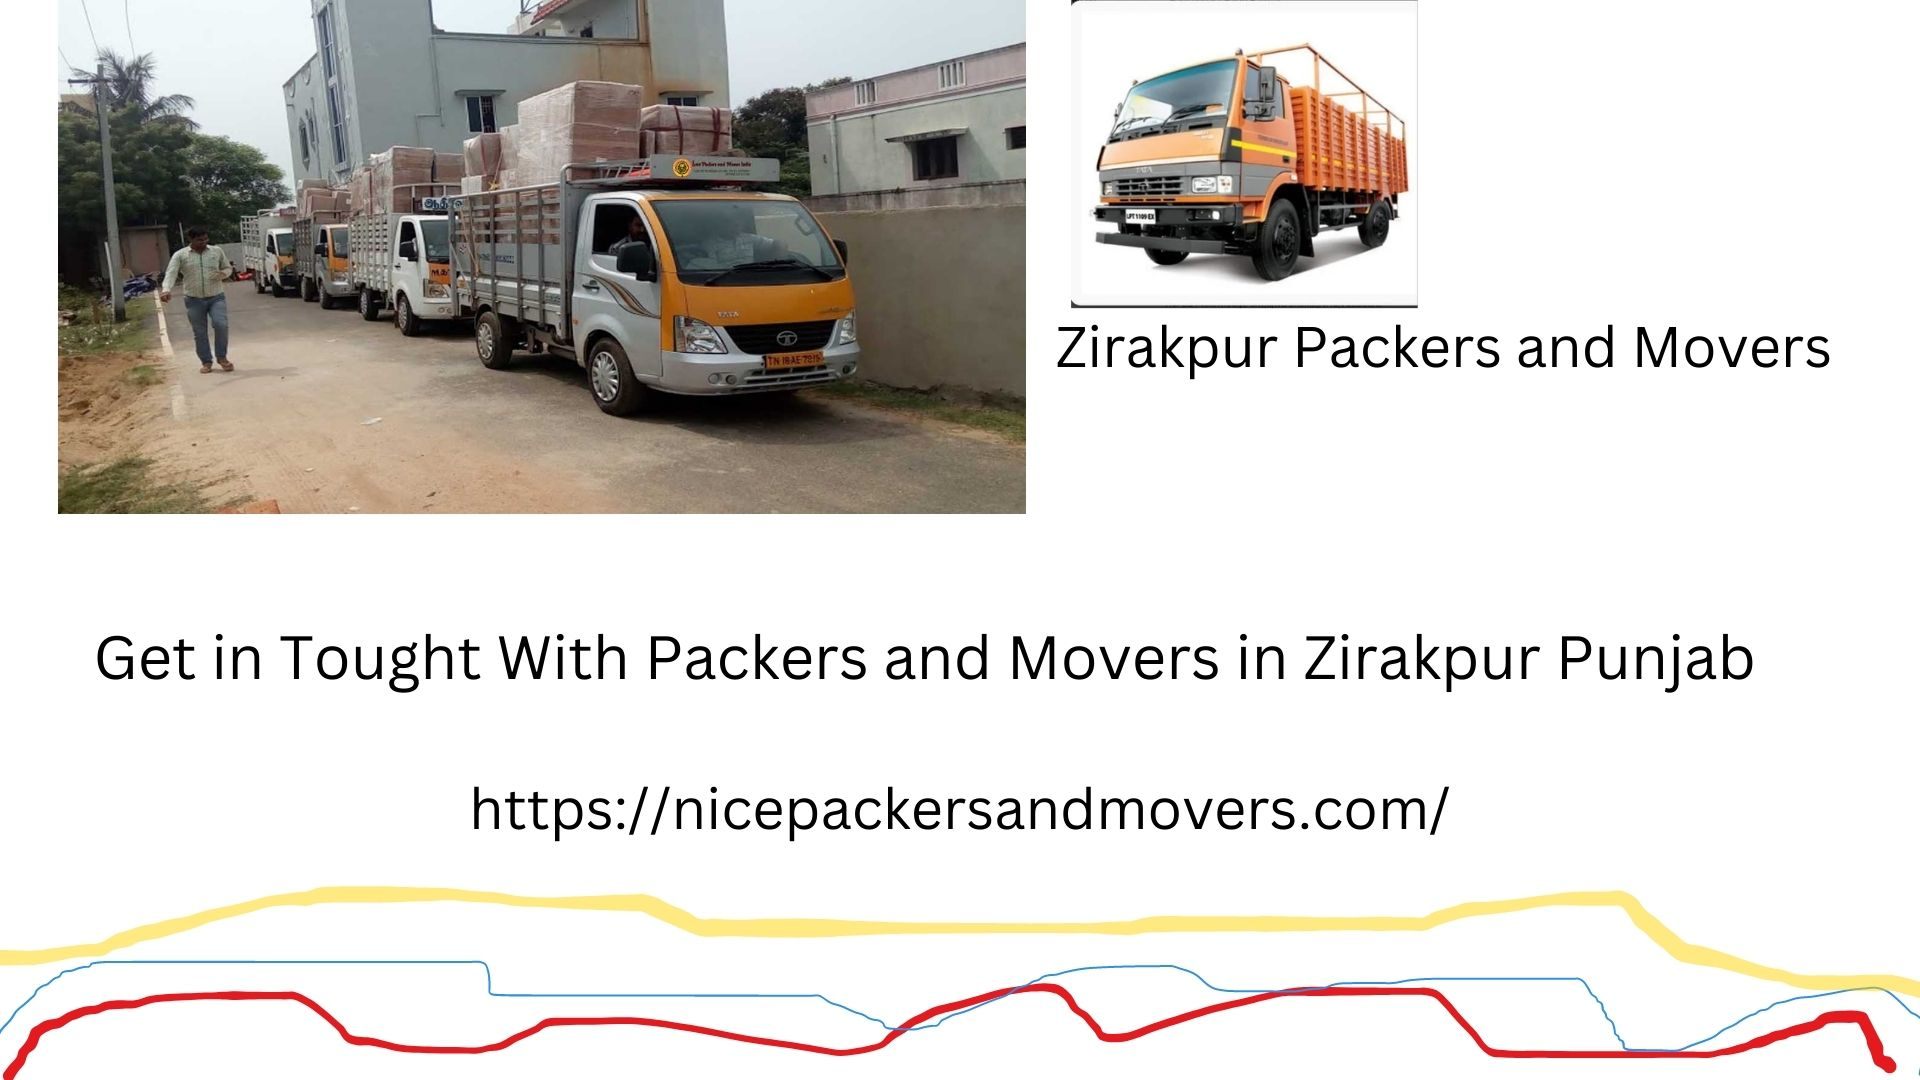 Looking Packers and Movers in Zirakpur? 06239984022